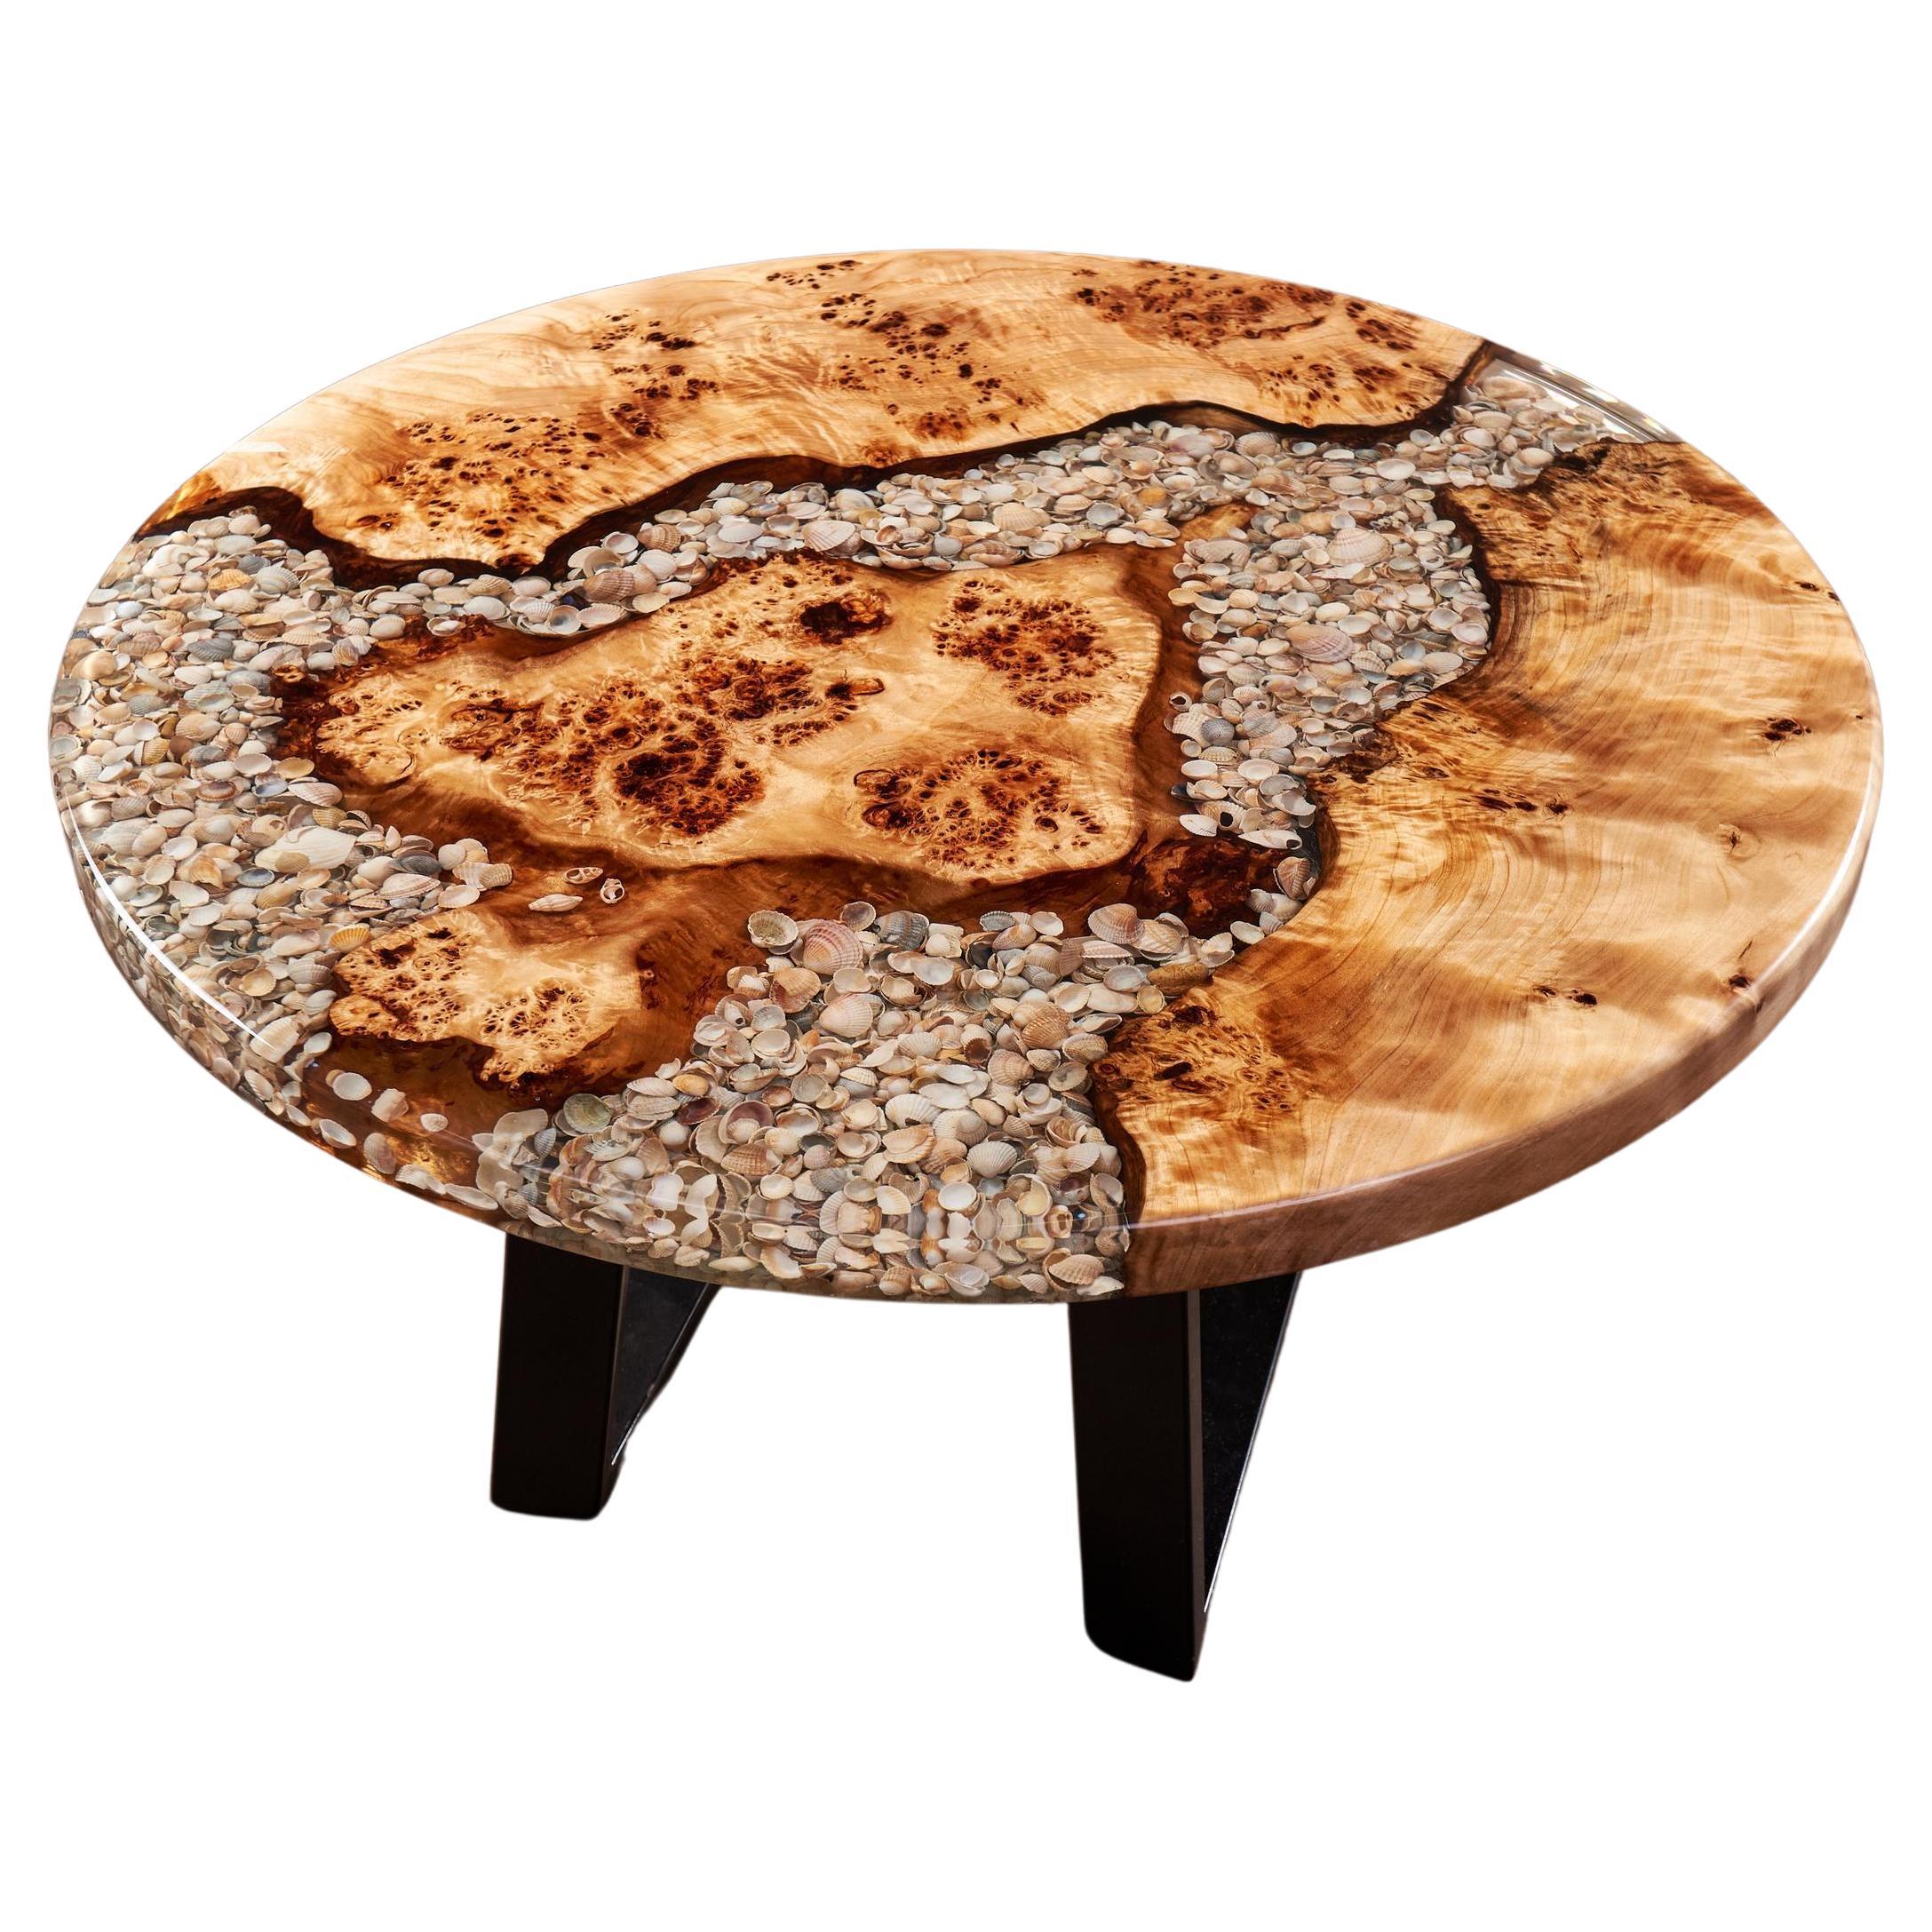 Burl Wood Coffee Table Round Wooden Resin Table Contemporary Modern Coffee Table For Sale